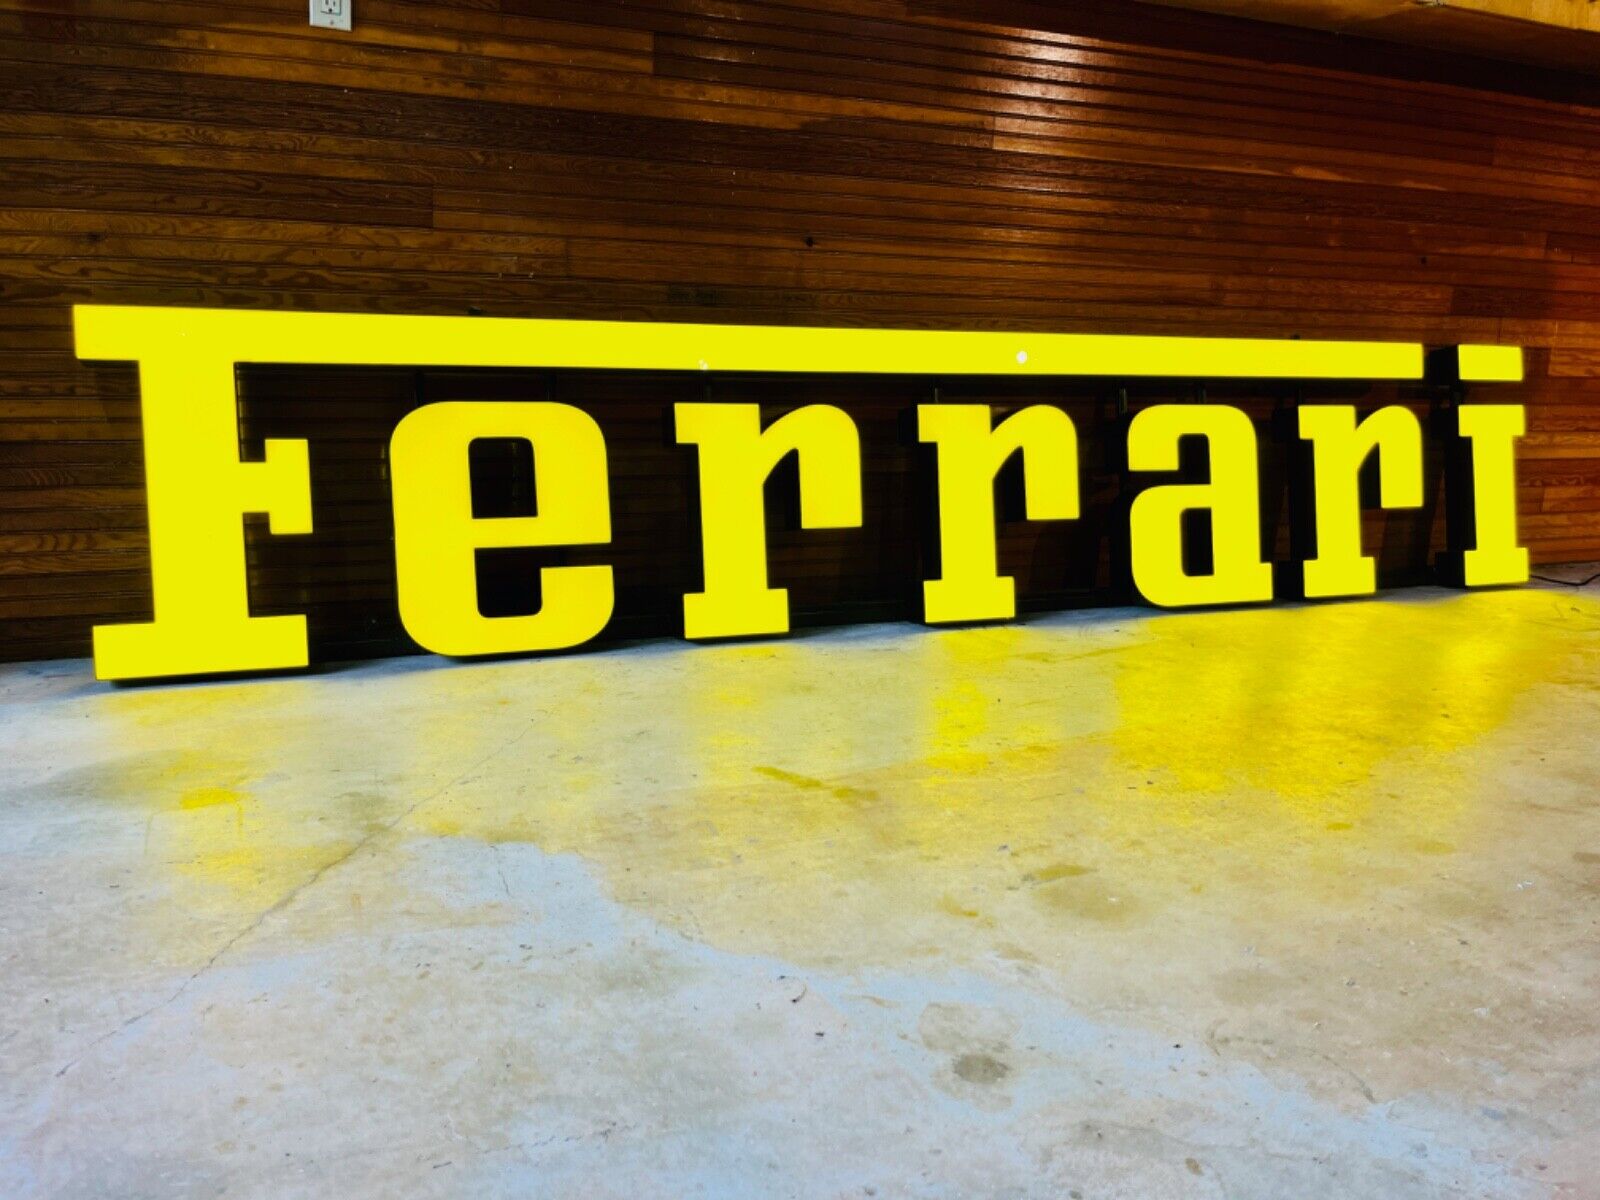 Extra Large Ferrari Sign | Illuminated Lighted Sign from Italy - In Custom Crate